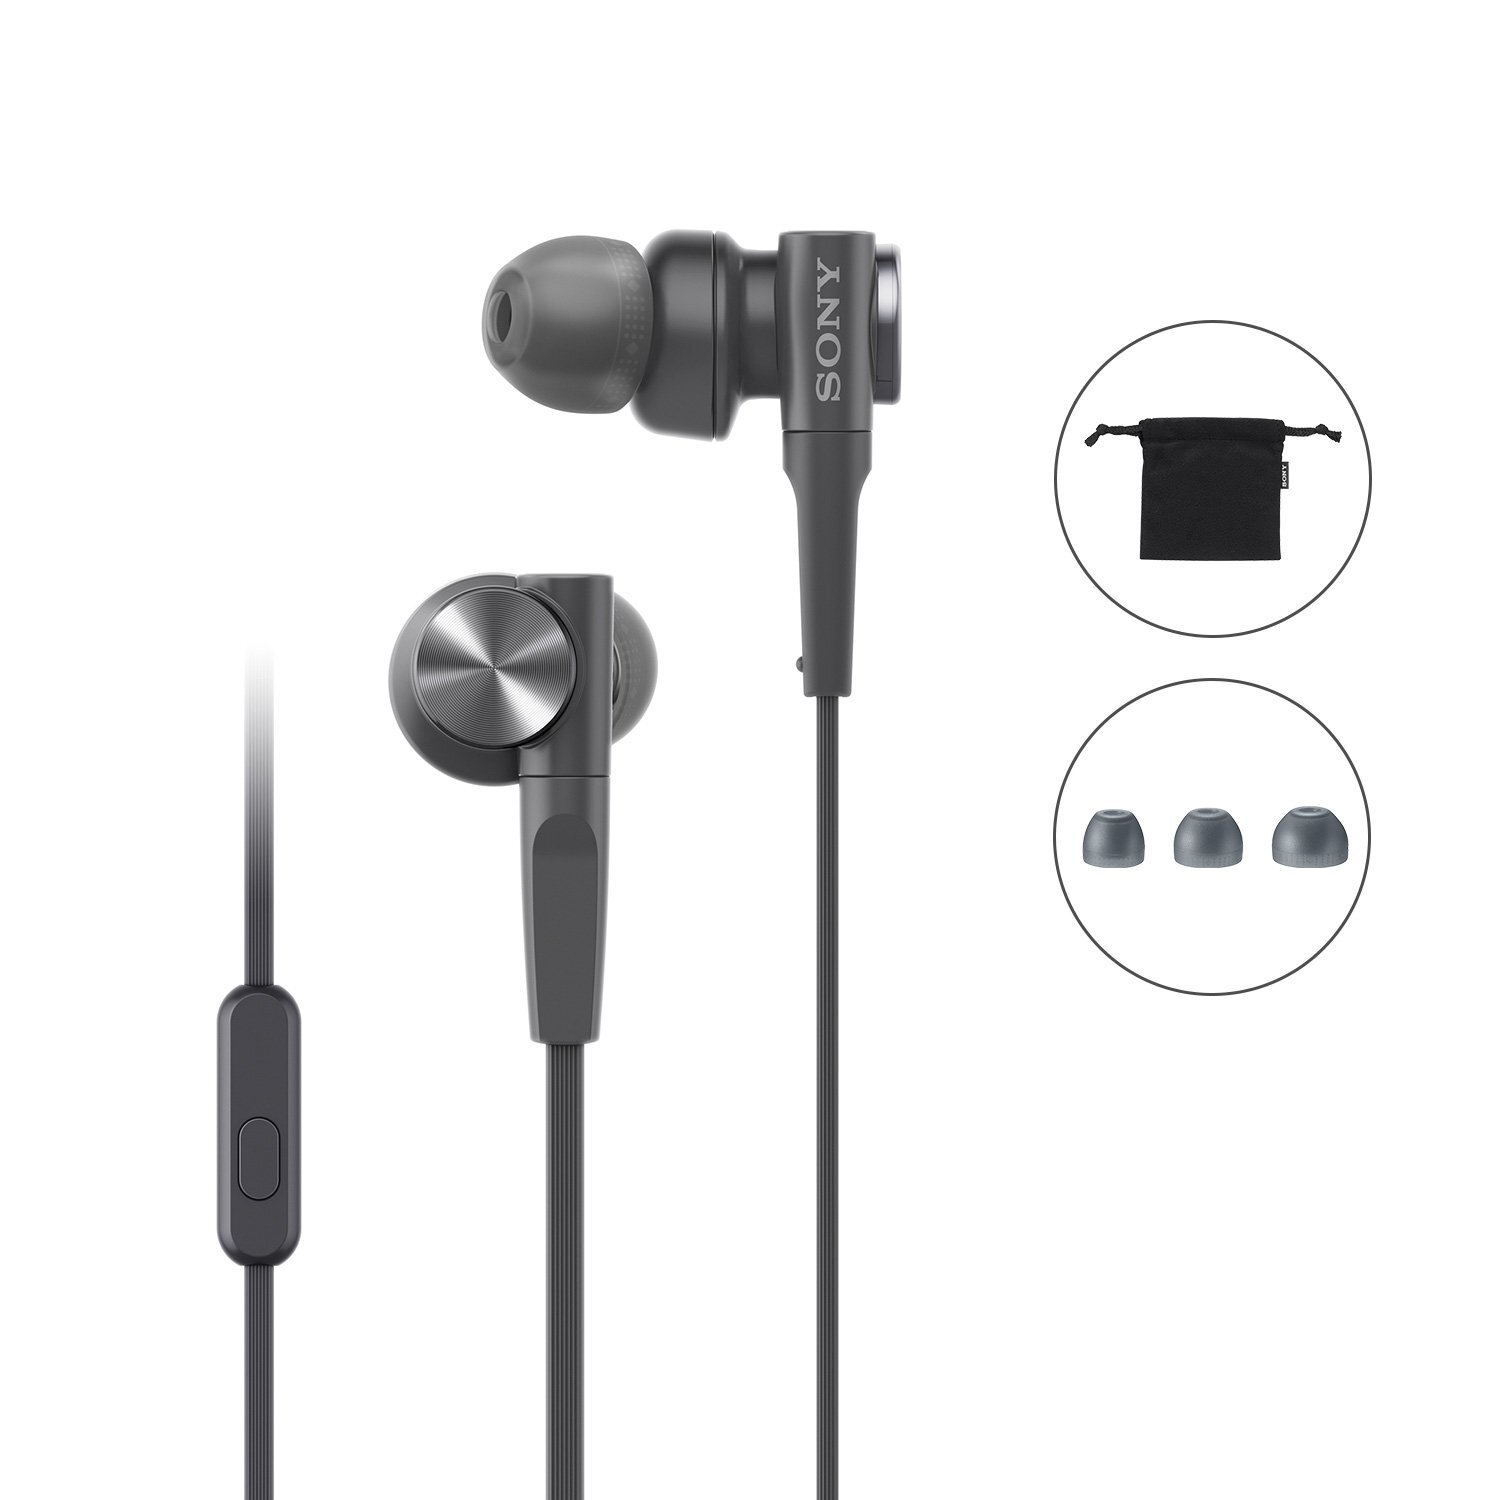 Sony MDR-XB55AP Wired Extra Bass in-Ear Headphones with Tangle Free Cable, 3.5mm Jack, Headset with Mic for Phone Calls and 1 Year Warranty - (Black)-M000000000379 www.mysocially.com